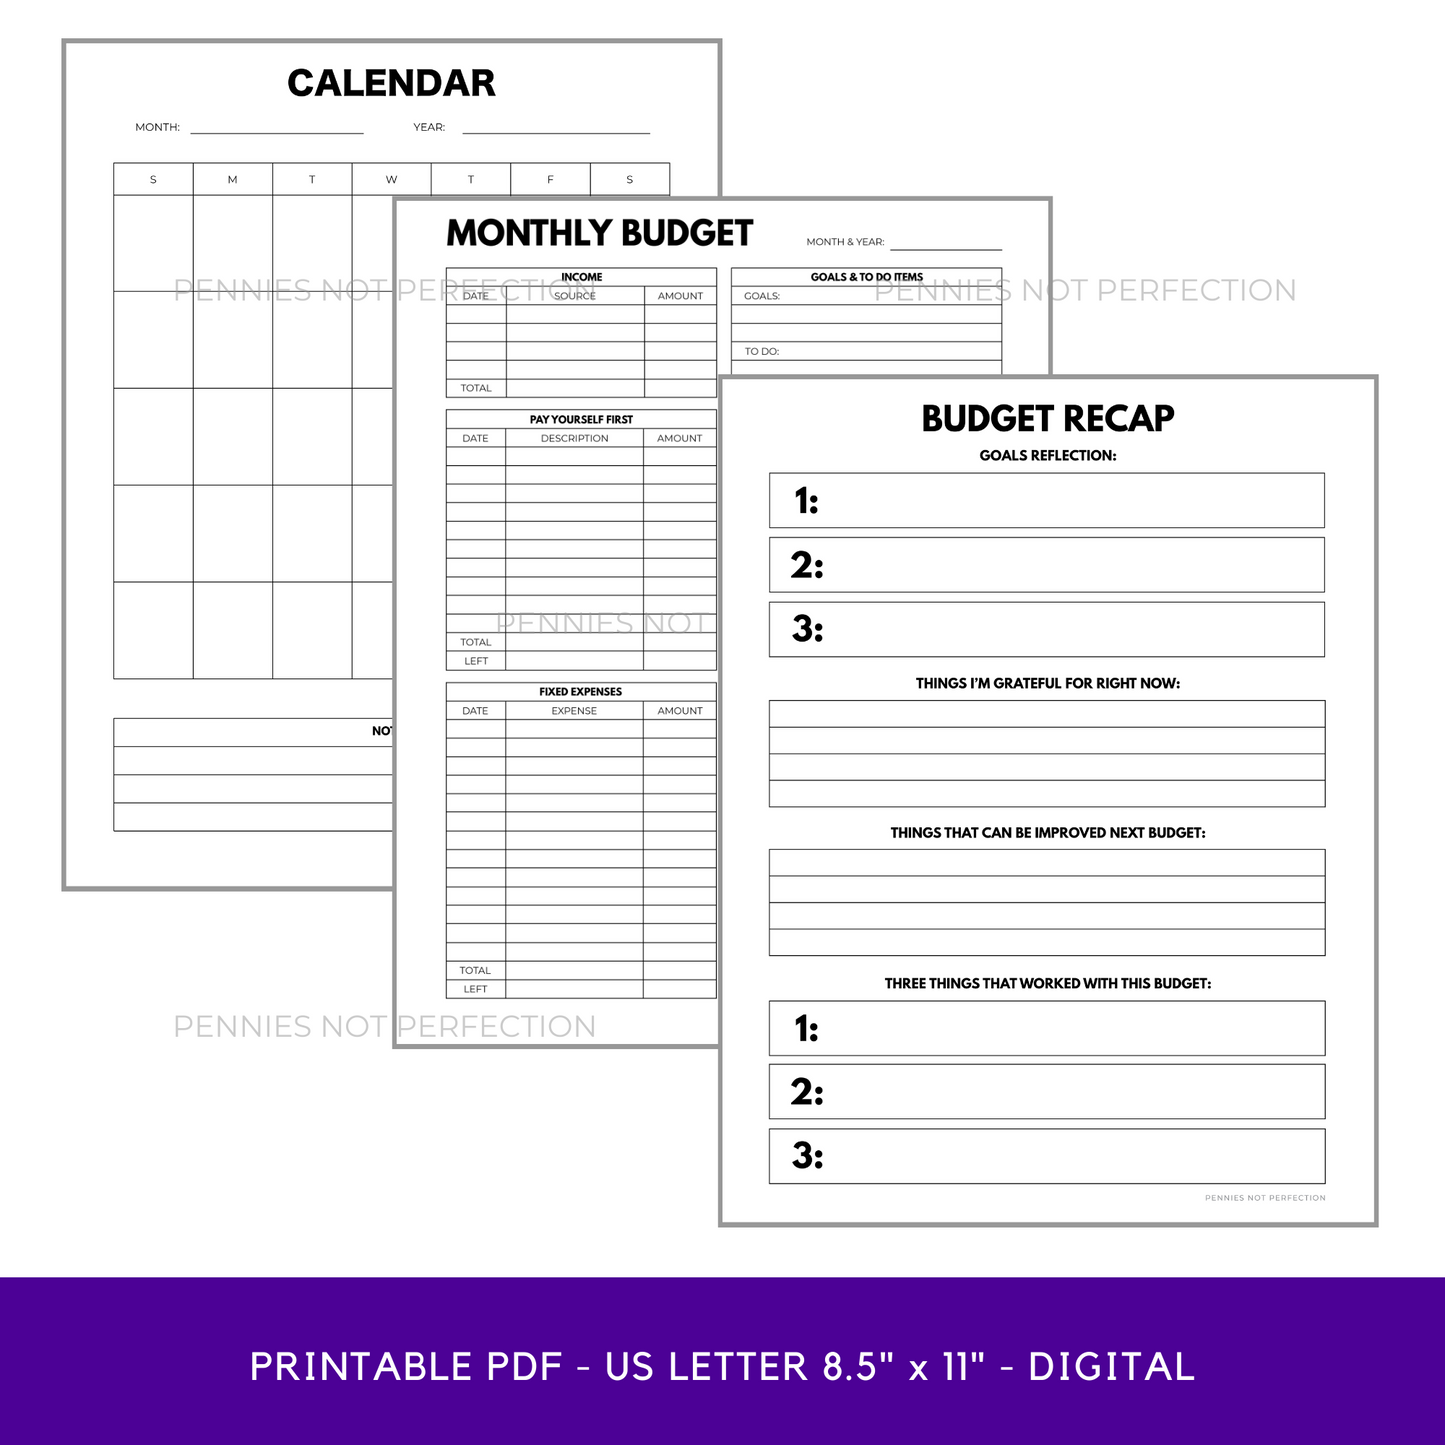 Pay Yourself First Budget Printable Planner